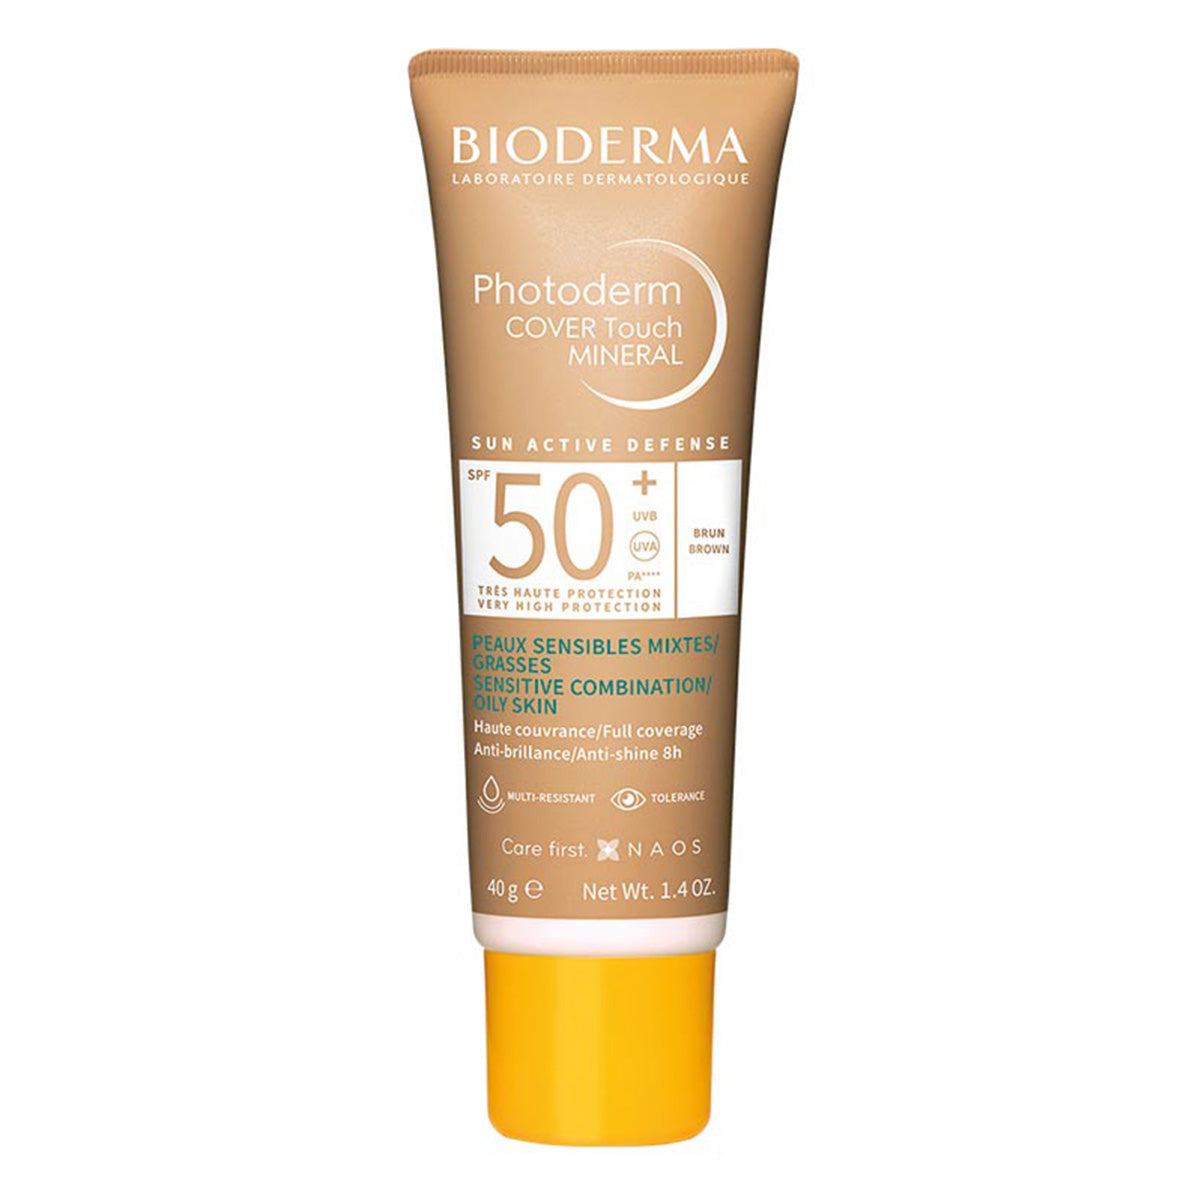 BIODERMA PHOTODERM COVER TOUCH MINERAL FPS50+ BRONCE 40G